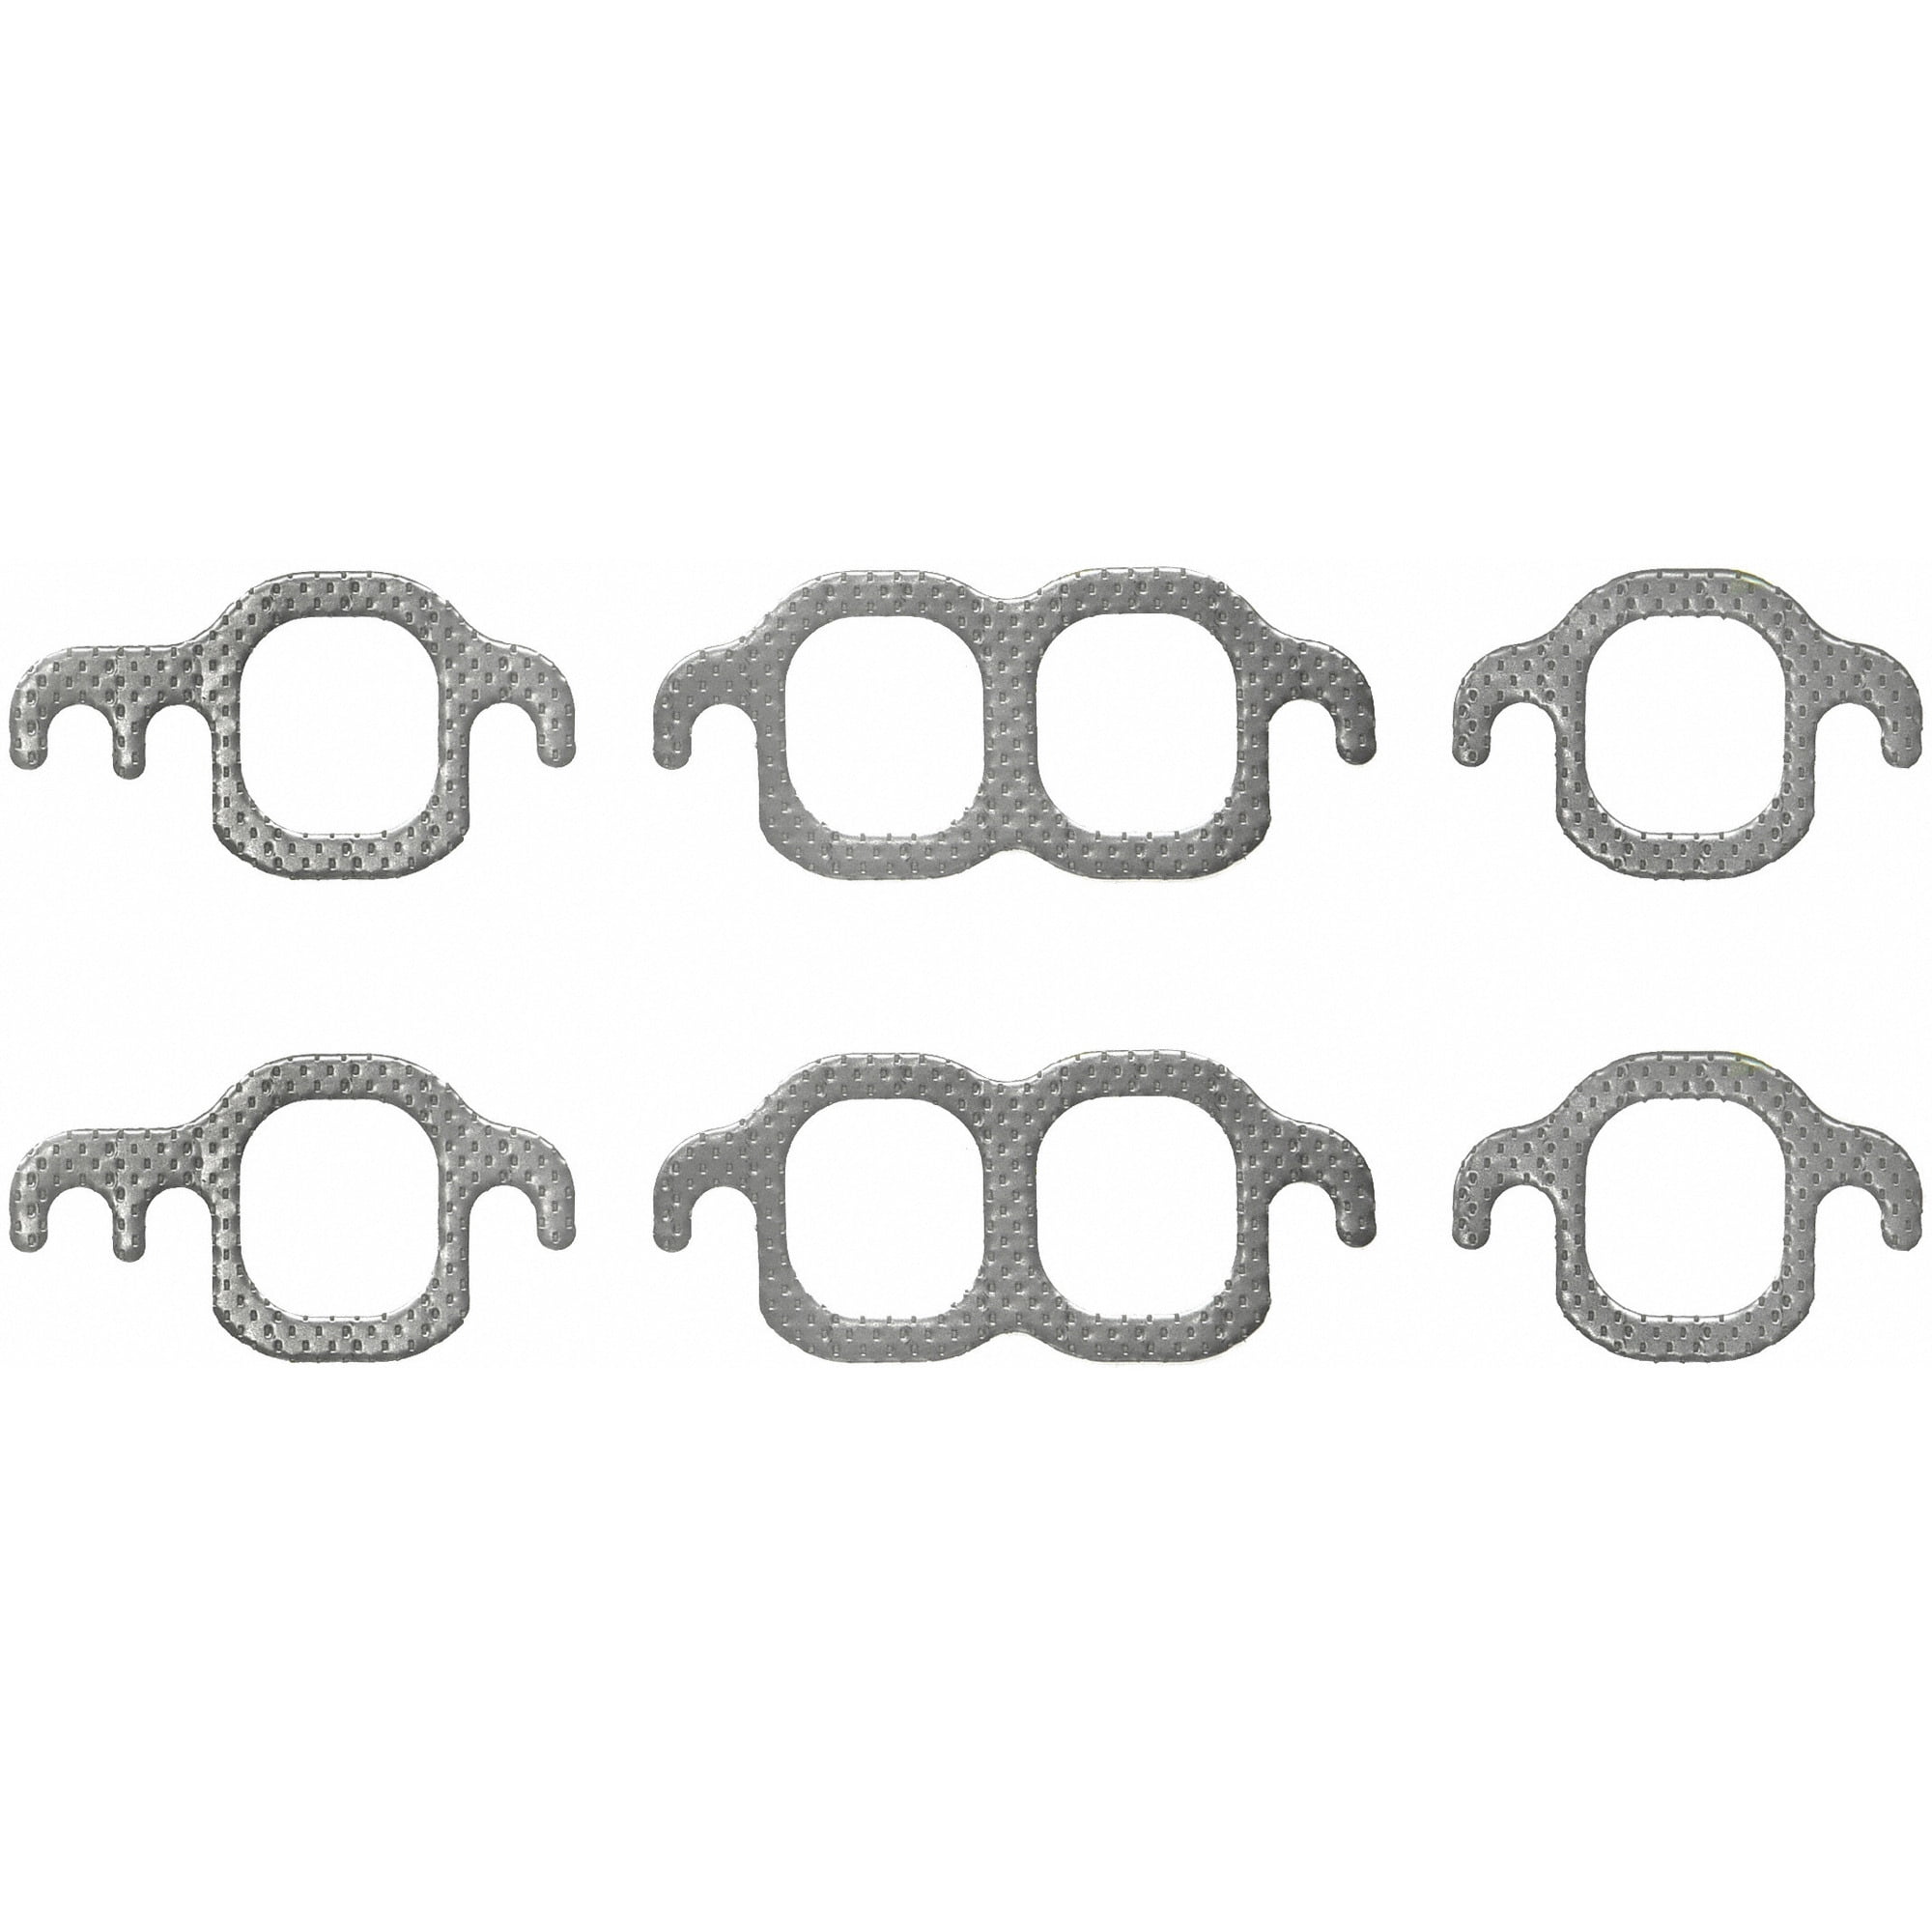 Compatible with 1999-2004 Oldsmobile Alero 3.4L V6 VIN Code E Head Gasket Set with 16 Head Bolts 